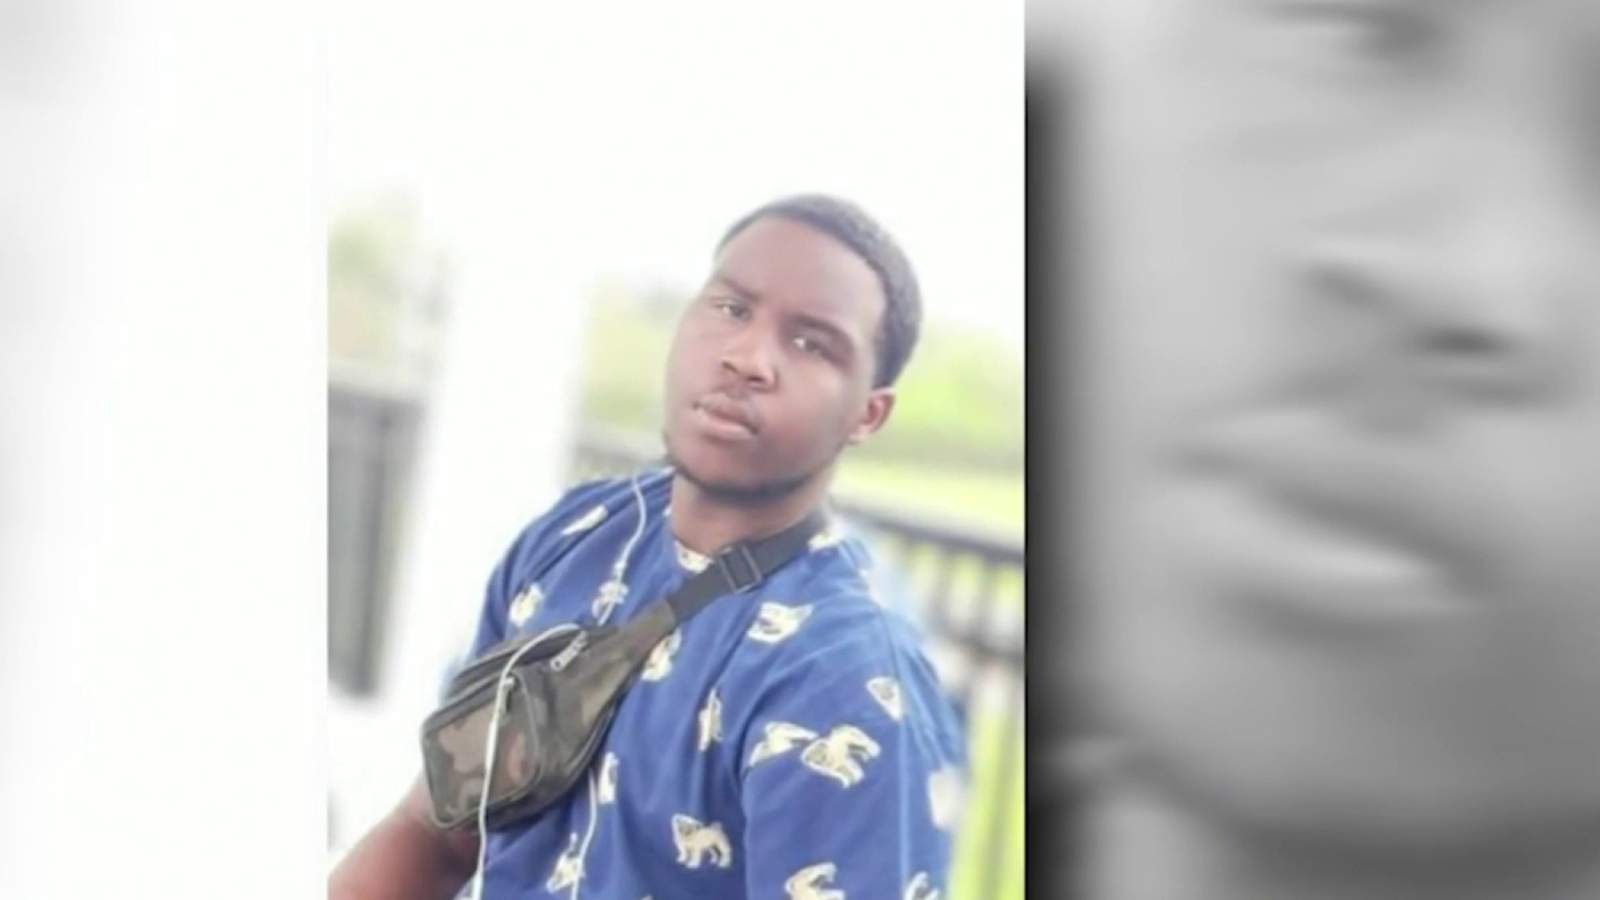 Sanford homeowner who fatally shot teen in back won’t face charges, attorney says